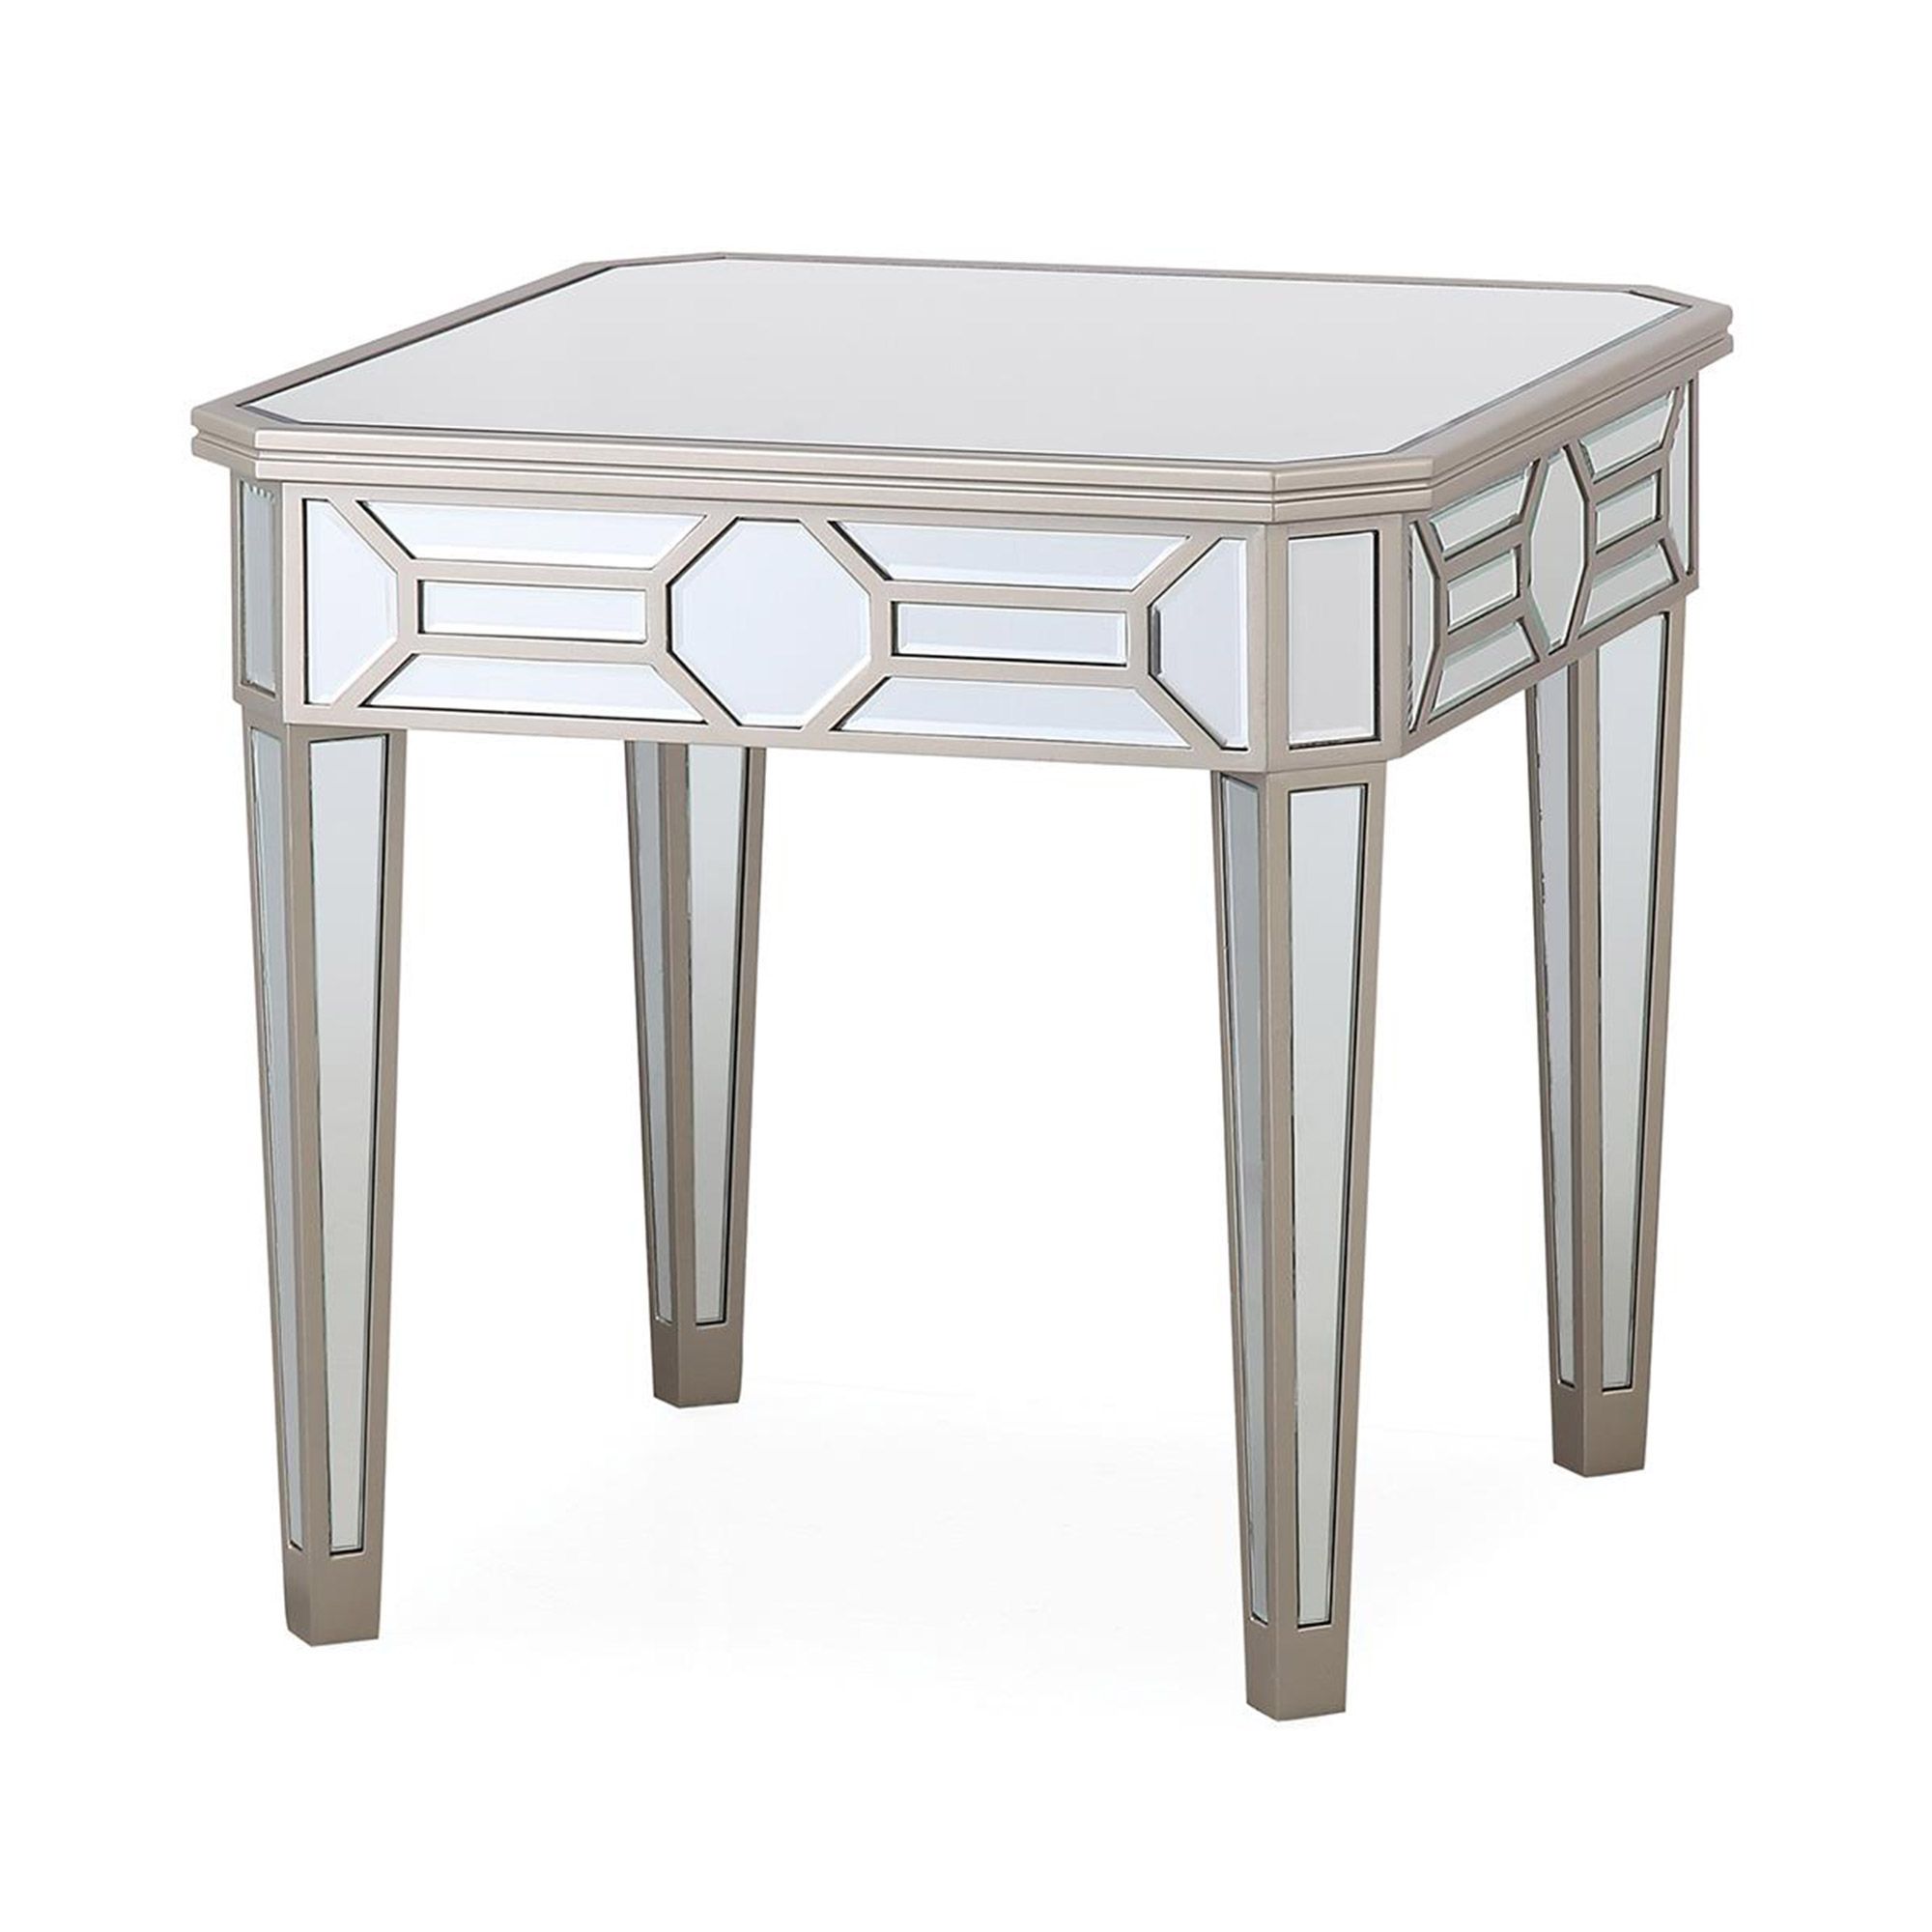 Ashley Side Lamp Table Mirrored In, Mirrored Side Table Ireland